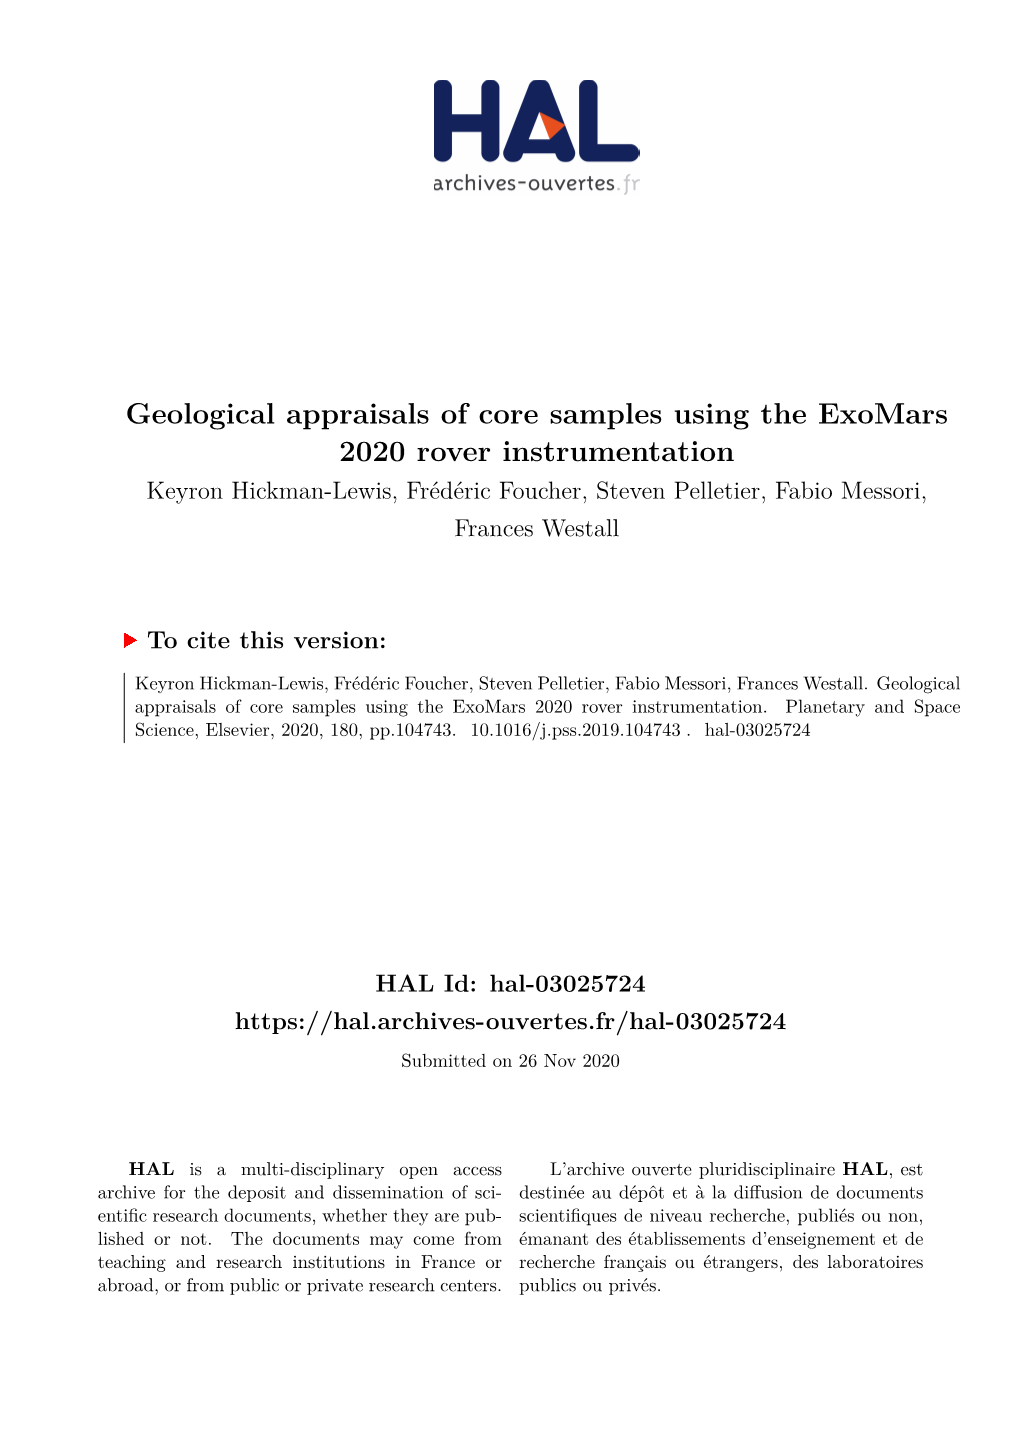 Geological Appraisals of Core Samples Using the Exomars 2020 Rover